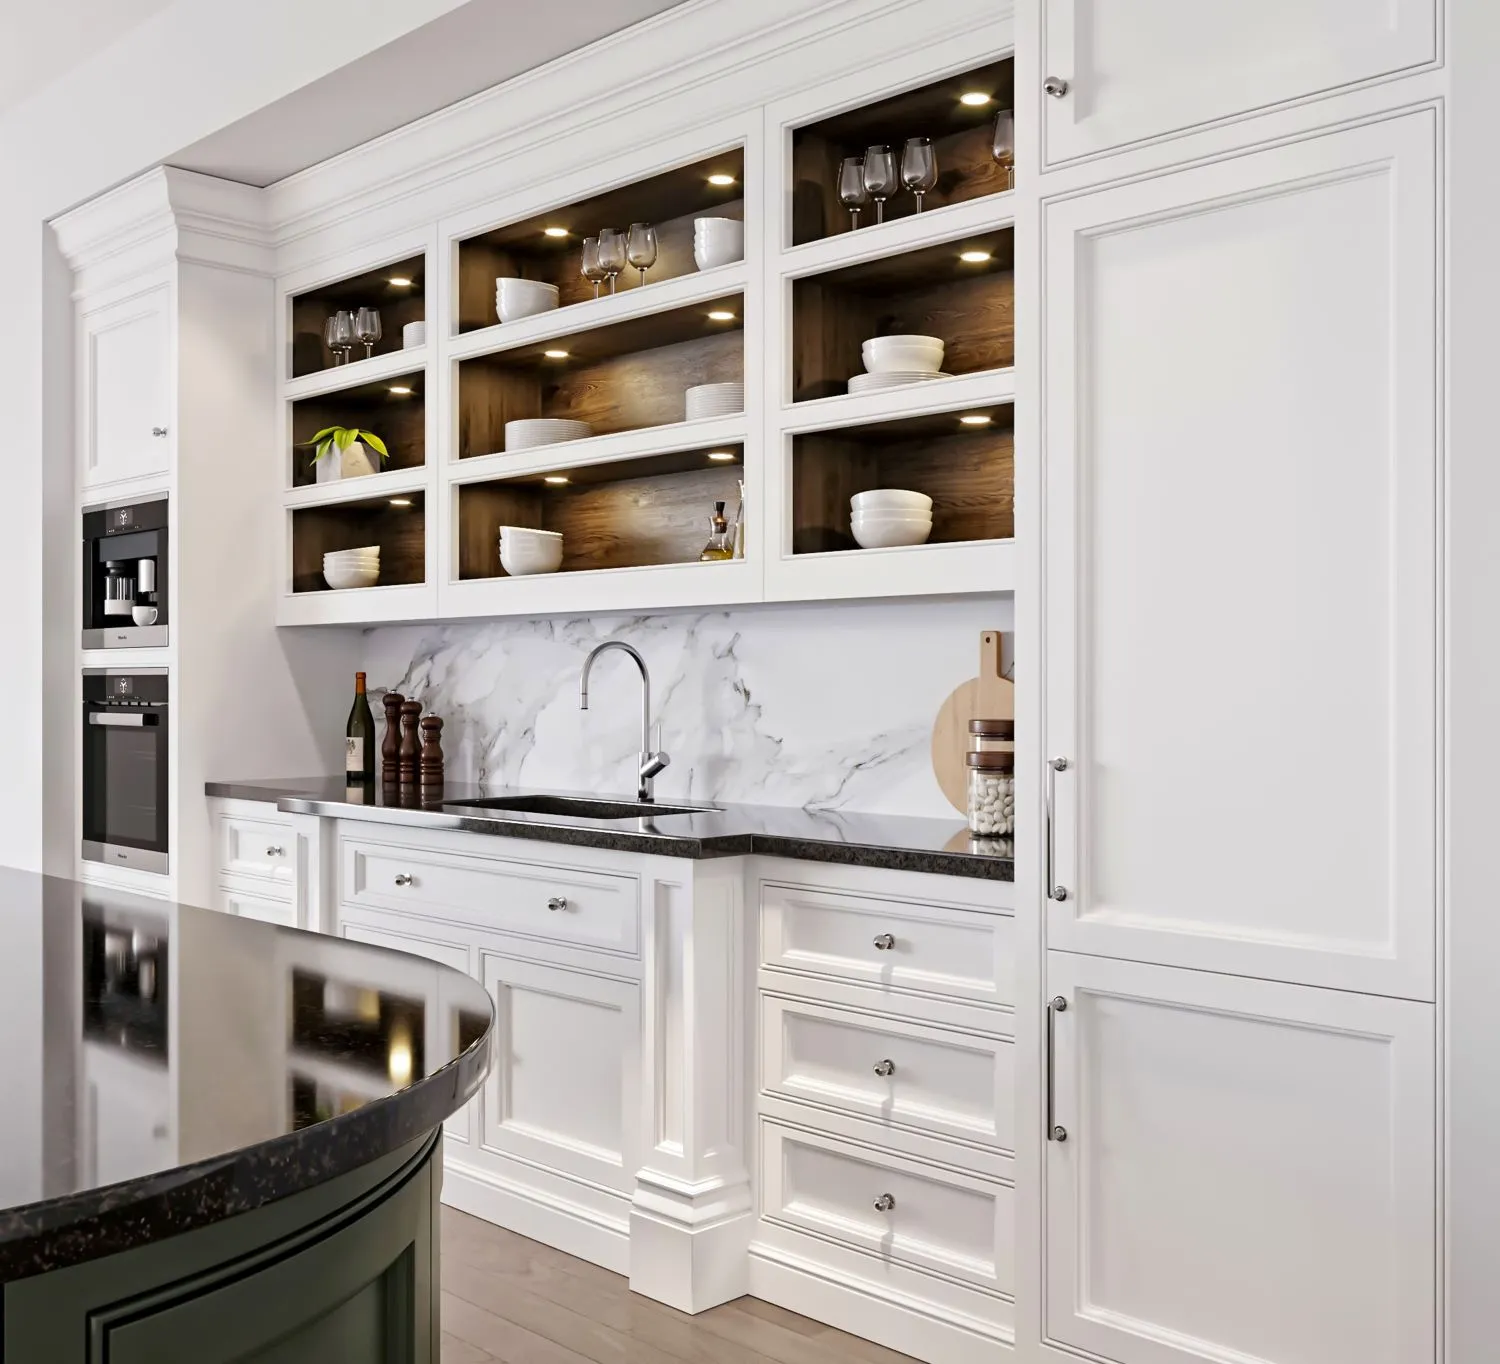 Use Tall Cabinets in the Kitchen help you have extra space to convering your kitchen into open-plan layout